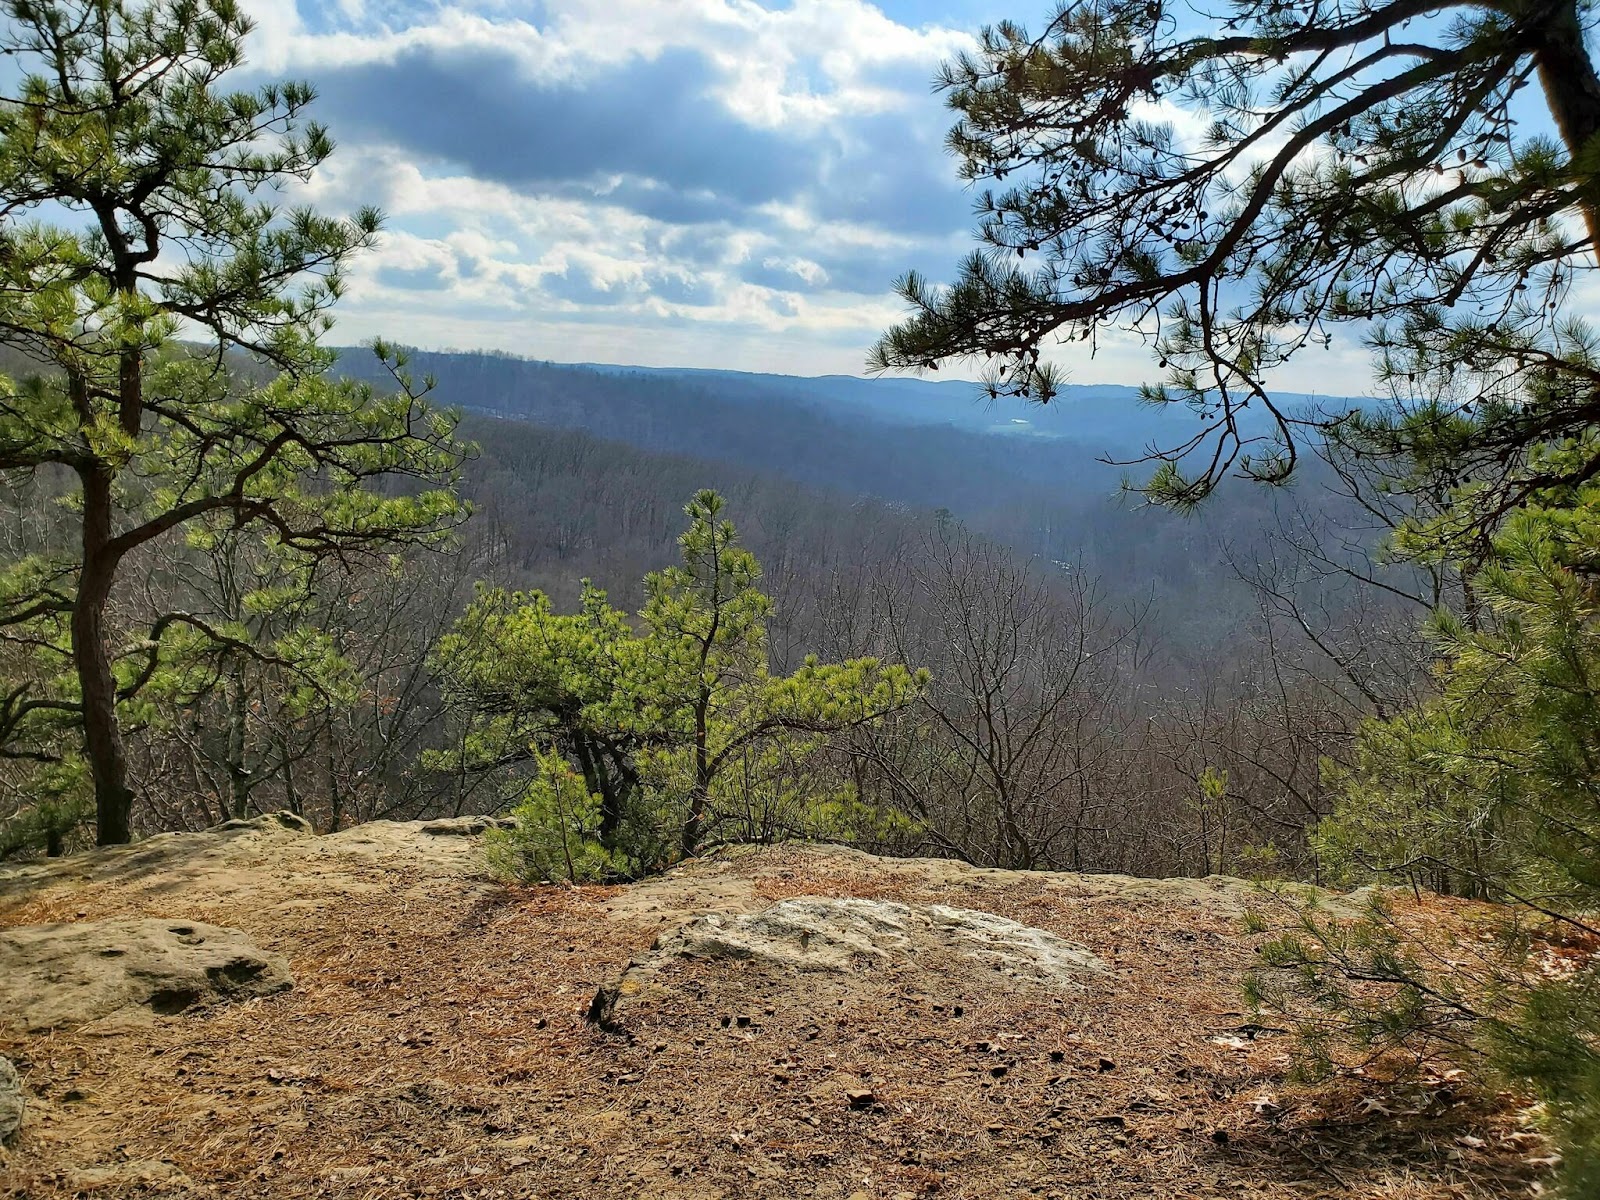 Locals and visitors alike enjoy visiting the Christmas Rocks State Nature Preserve.